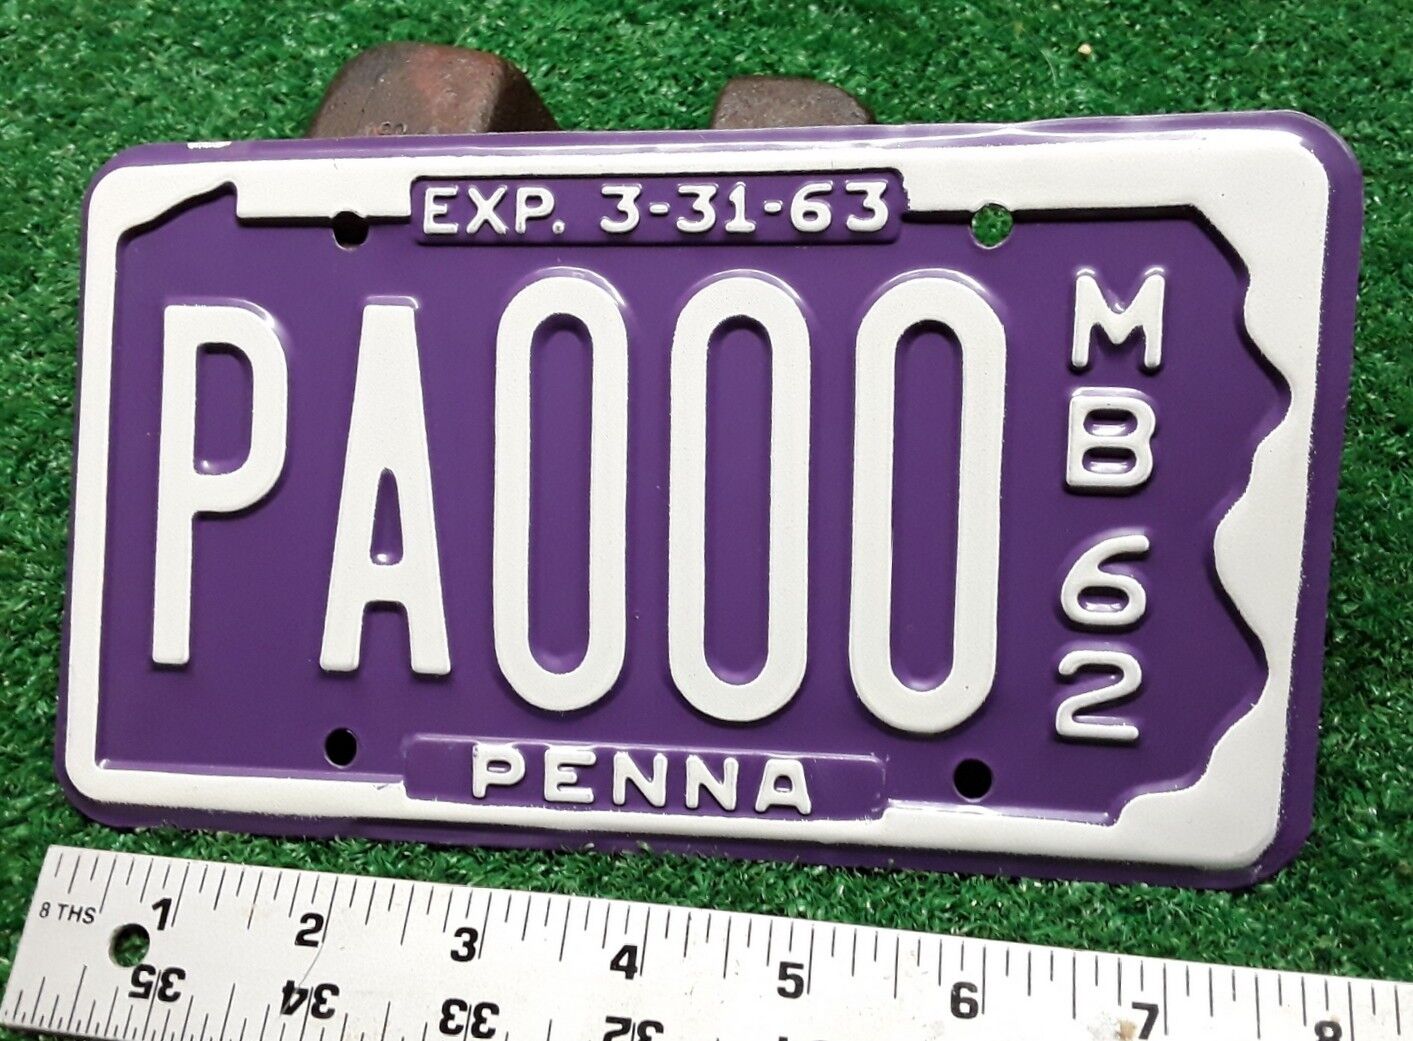 SAMPLE - PENNSYLVANIA - 1962 purple boat license plate. Possibly one of a kind